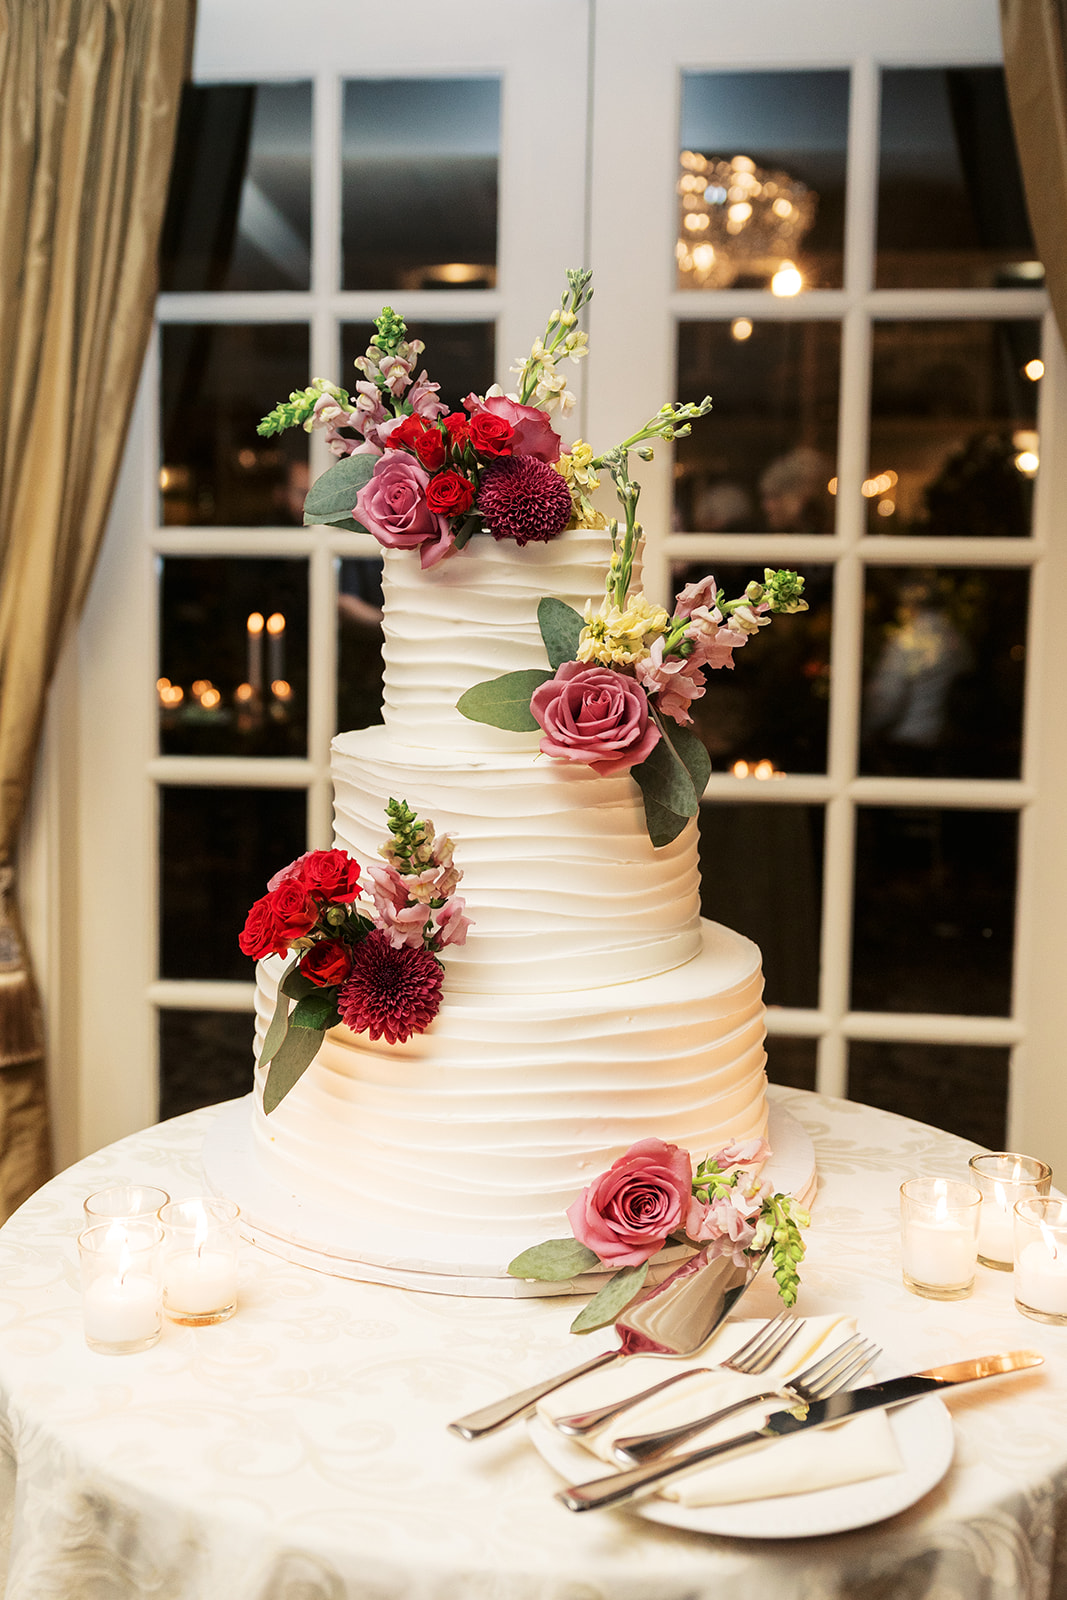 A three tier cake covered with red and pink flowers